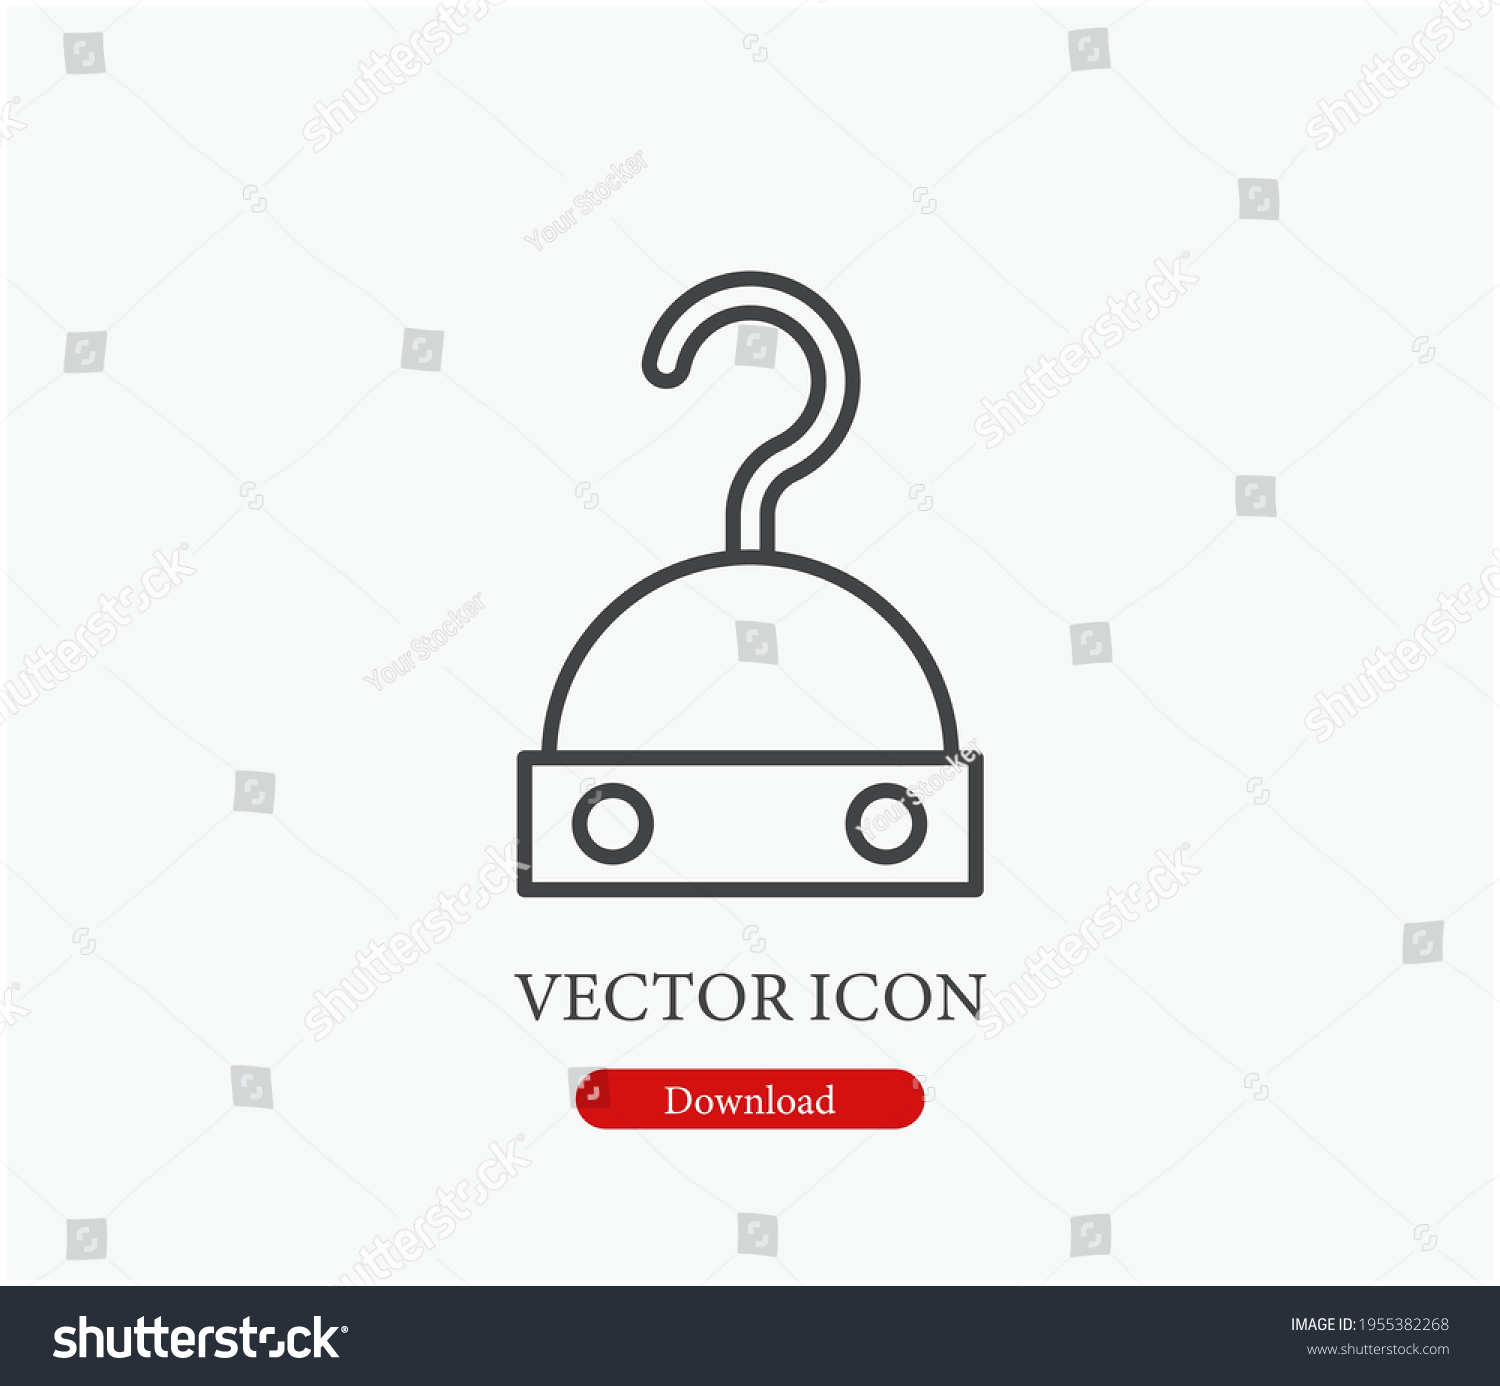 SVG of Pirate vector icon. Editable stroke. Symbol in Line Art Style for Design, Presentation, Website or Apps Elements, Logo. Pixel vector graphics - Vector svg